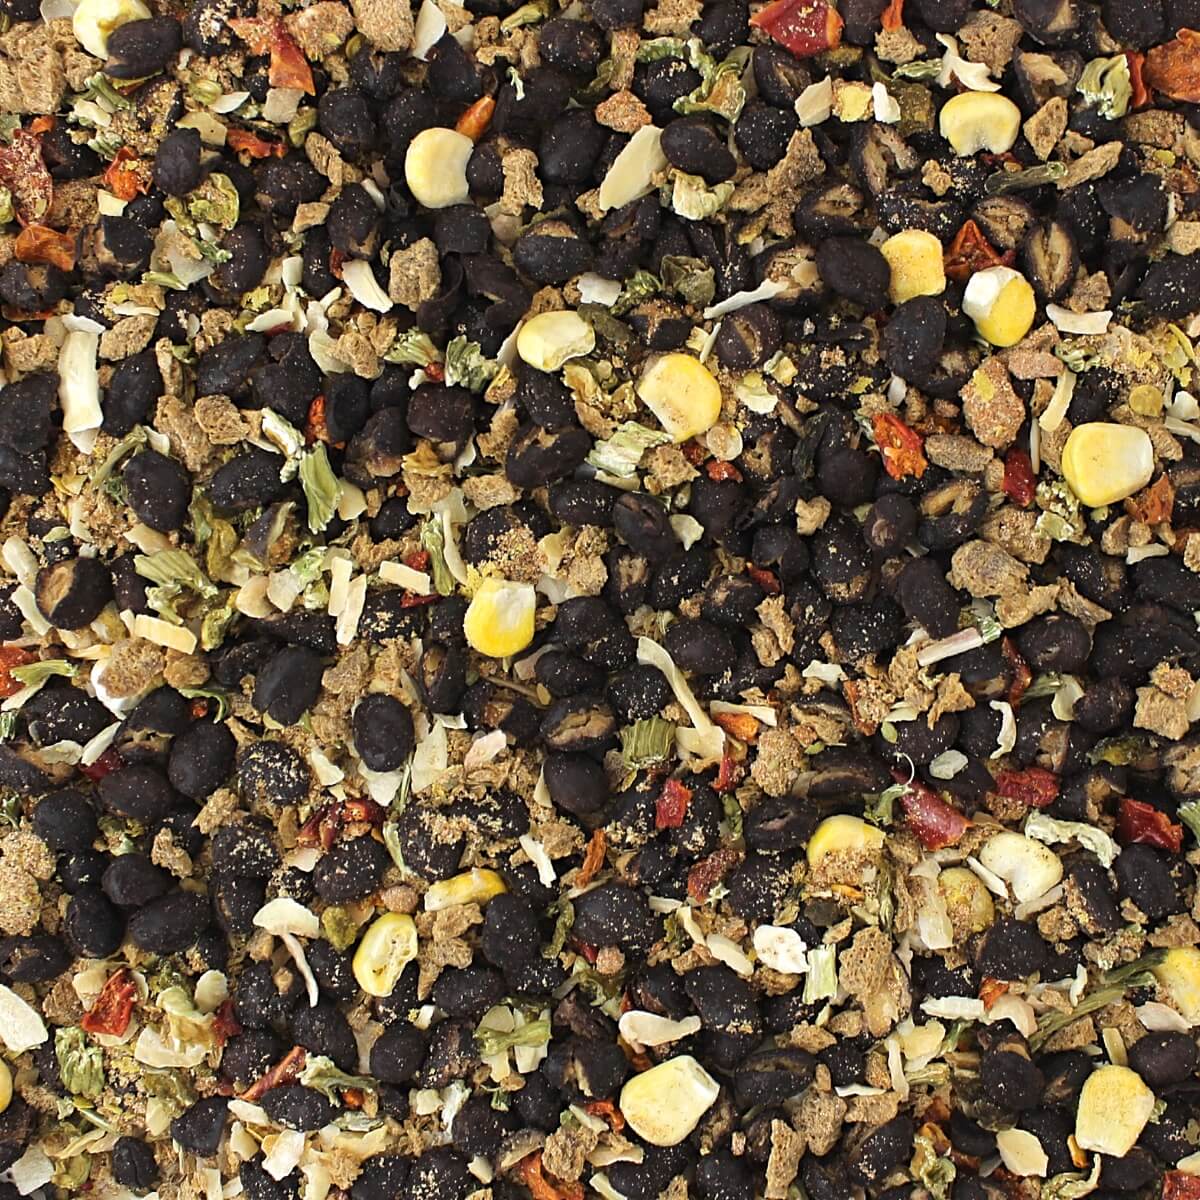 A close up of a mixture of black seeds and nuts from the Harmony House Value Soup Variety Pack.